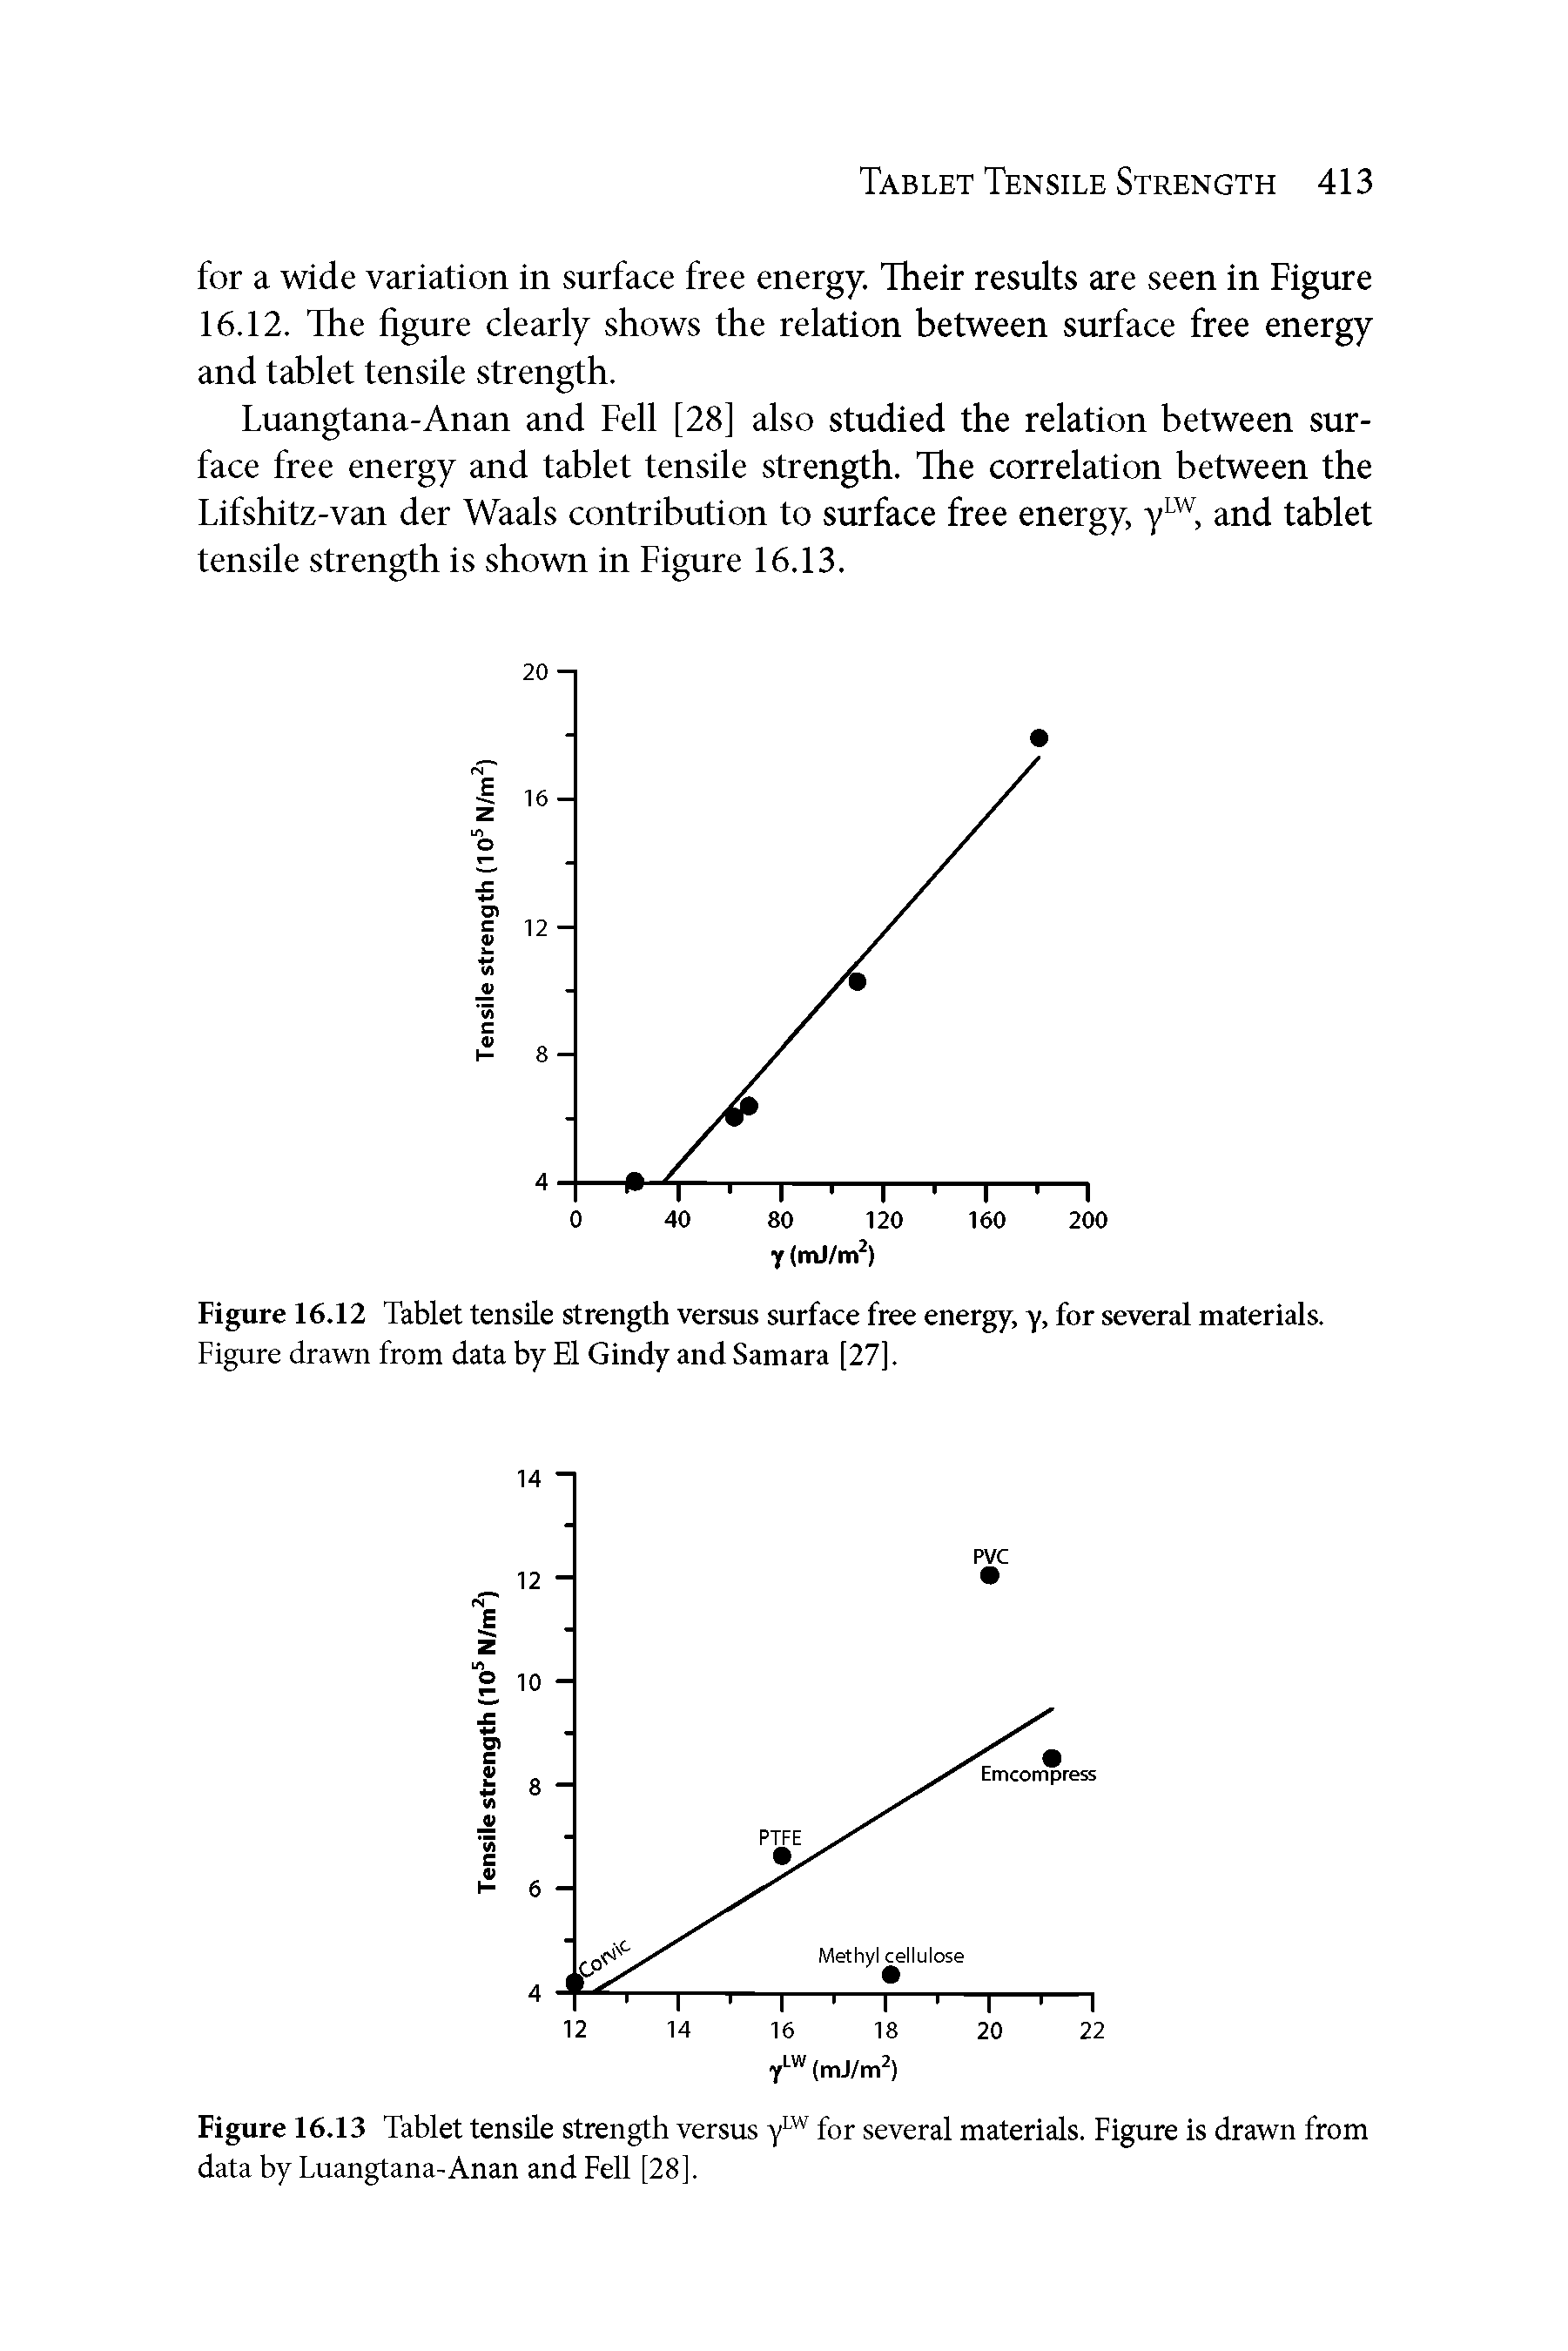 Figure 16.12 Tablet tensile strength versus surface free energy, y. for several materials.